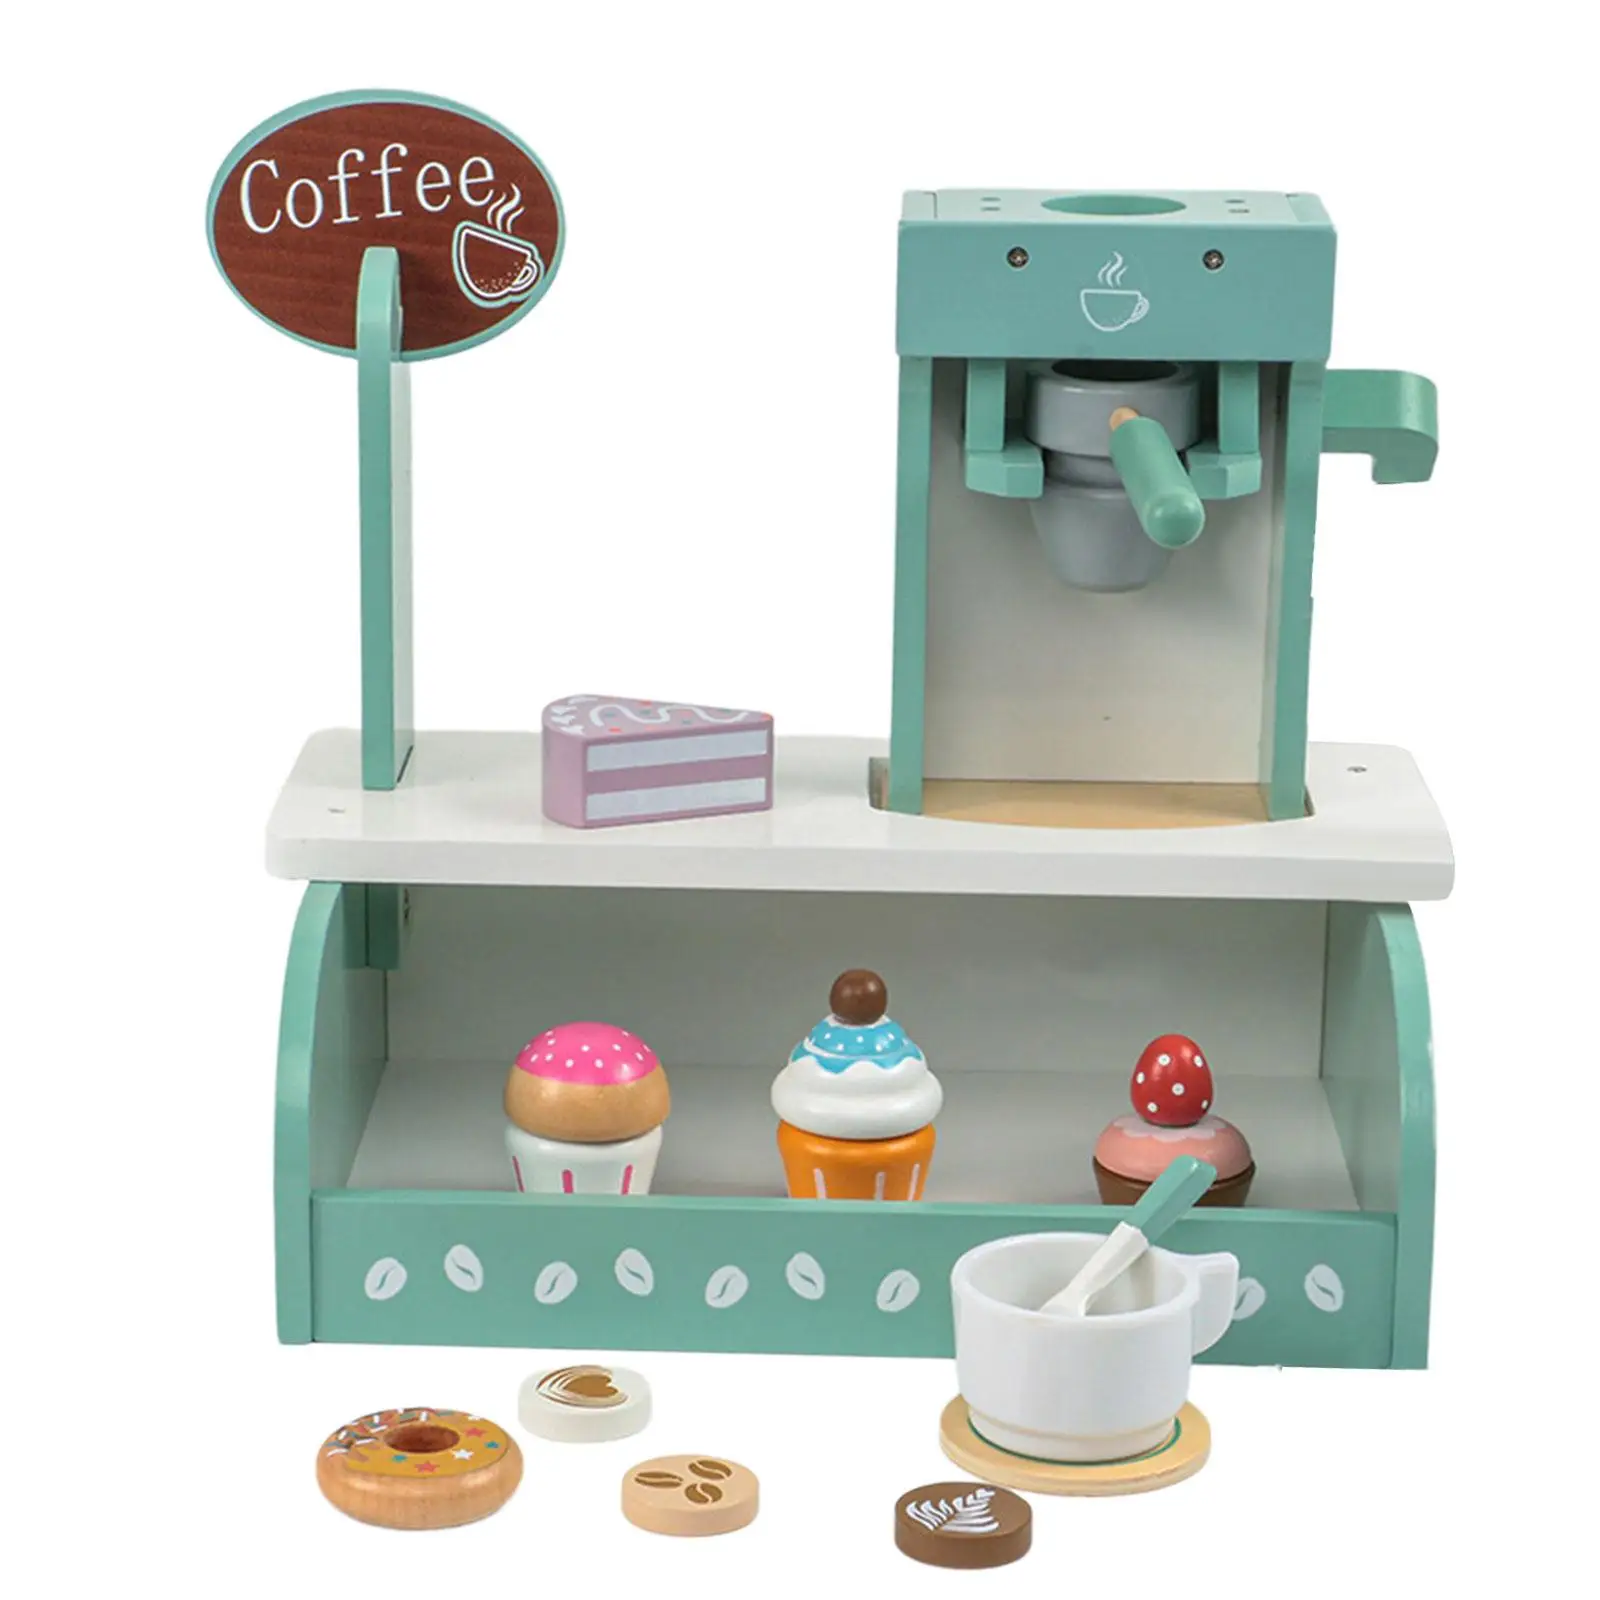 Kids Coffee Maker Playset Toy Wooden Coffee Maker Set for 3+ Year Old